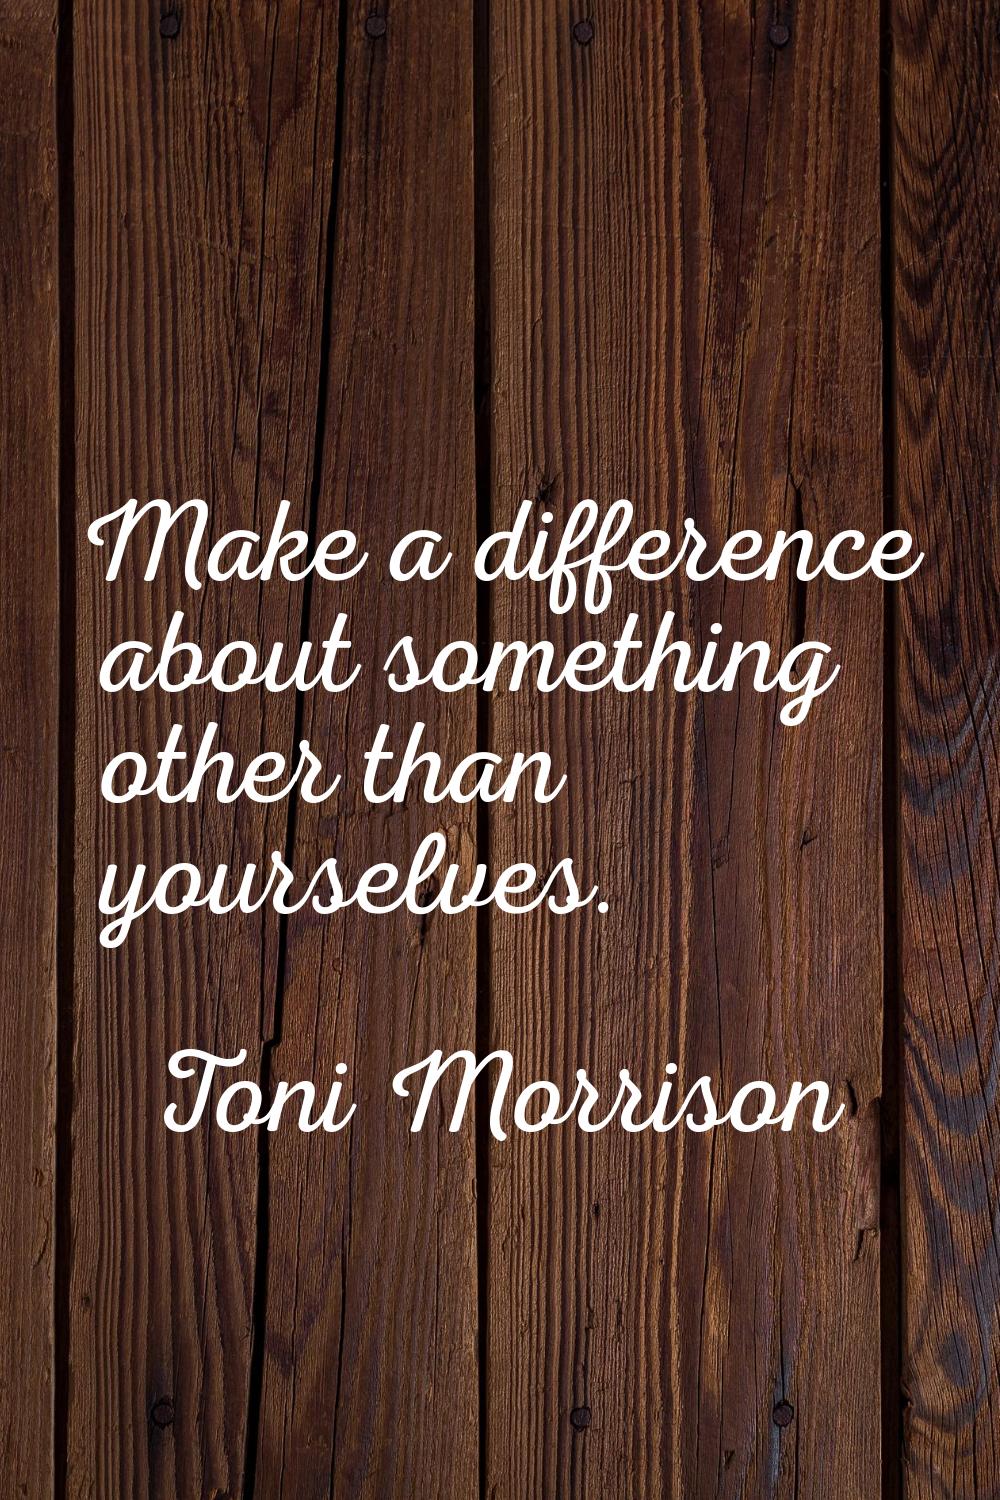 Make a difference about something other than yourselves.